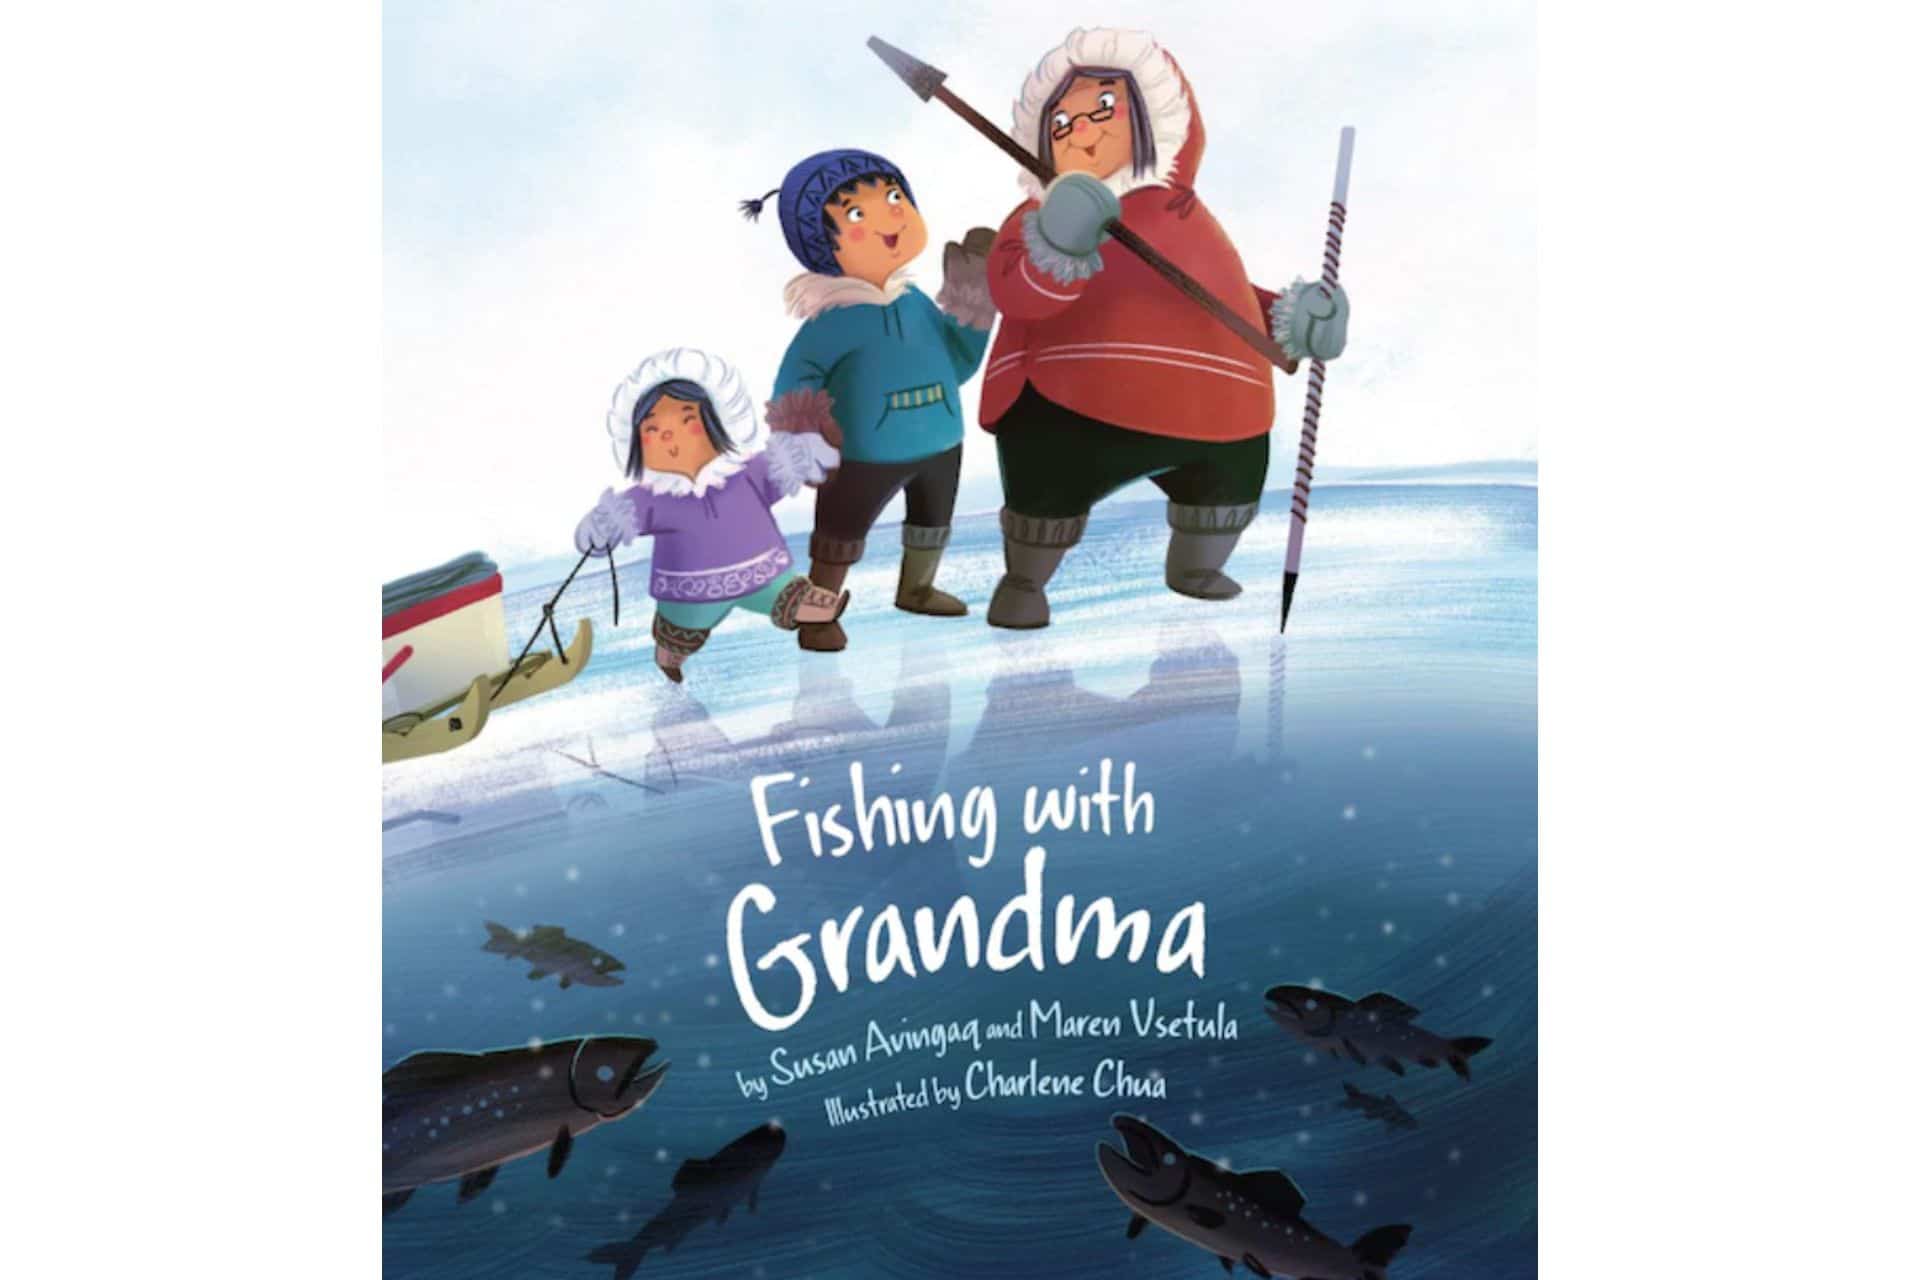 Indigenous fishingwithgrandma 1920x1280 1 - 10 amazing indigenous children's books to add to your child's library